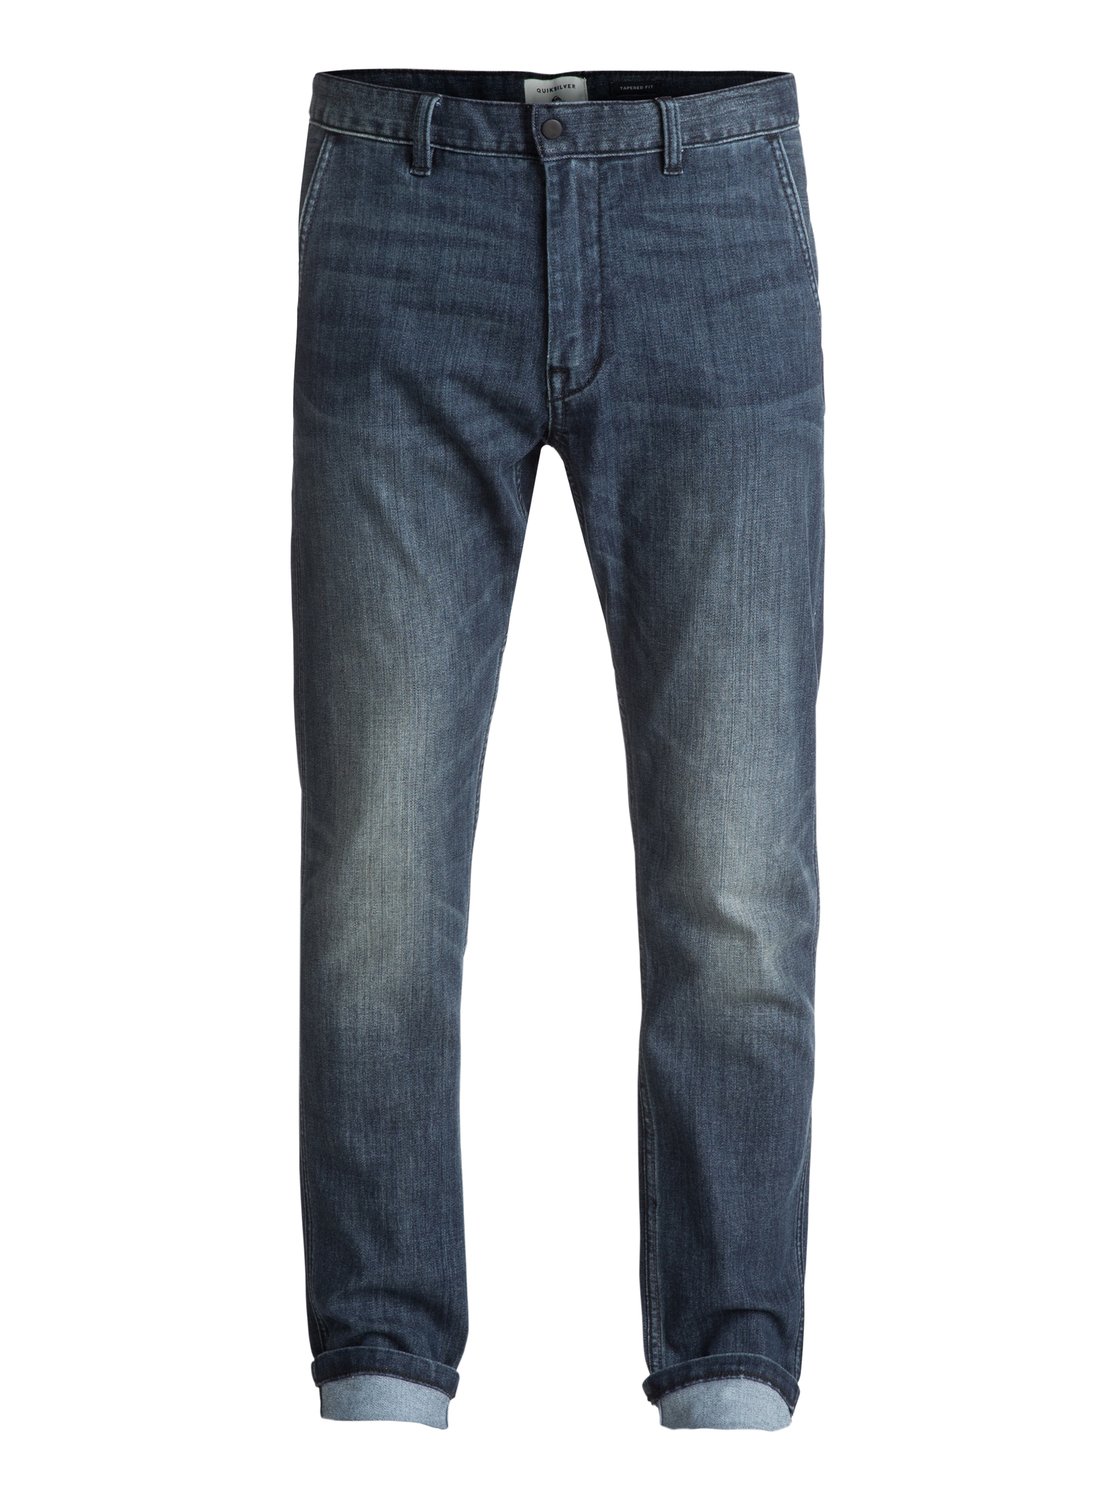 Athletic Coolmax - Tapered Fit Jeans for Men EQYDP03335 | Quiksilver